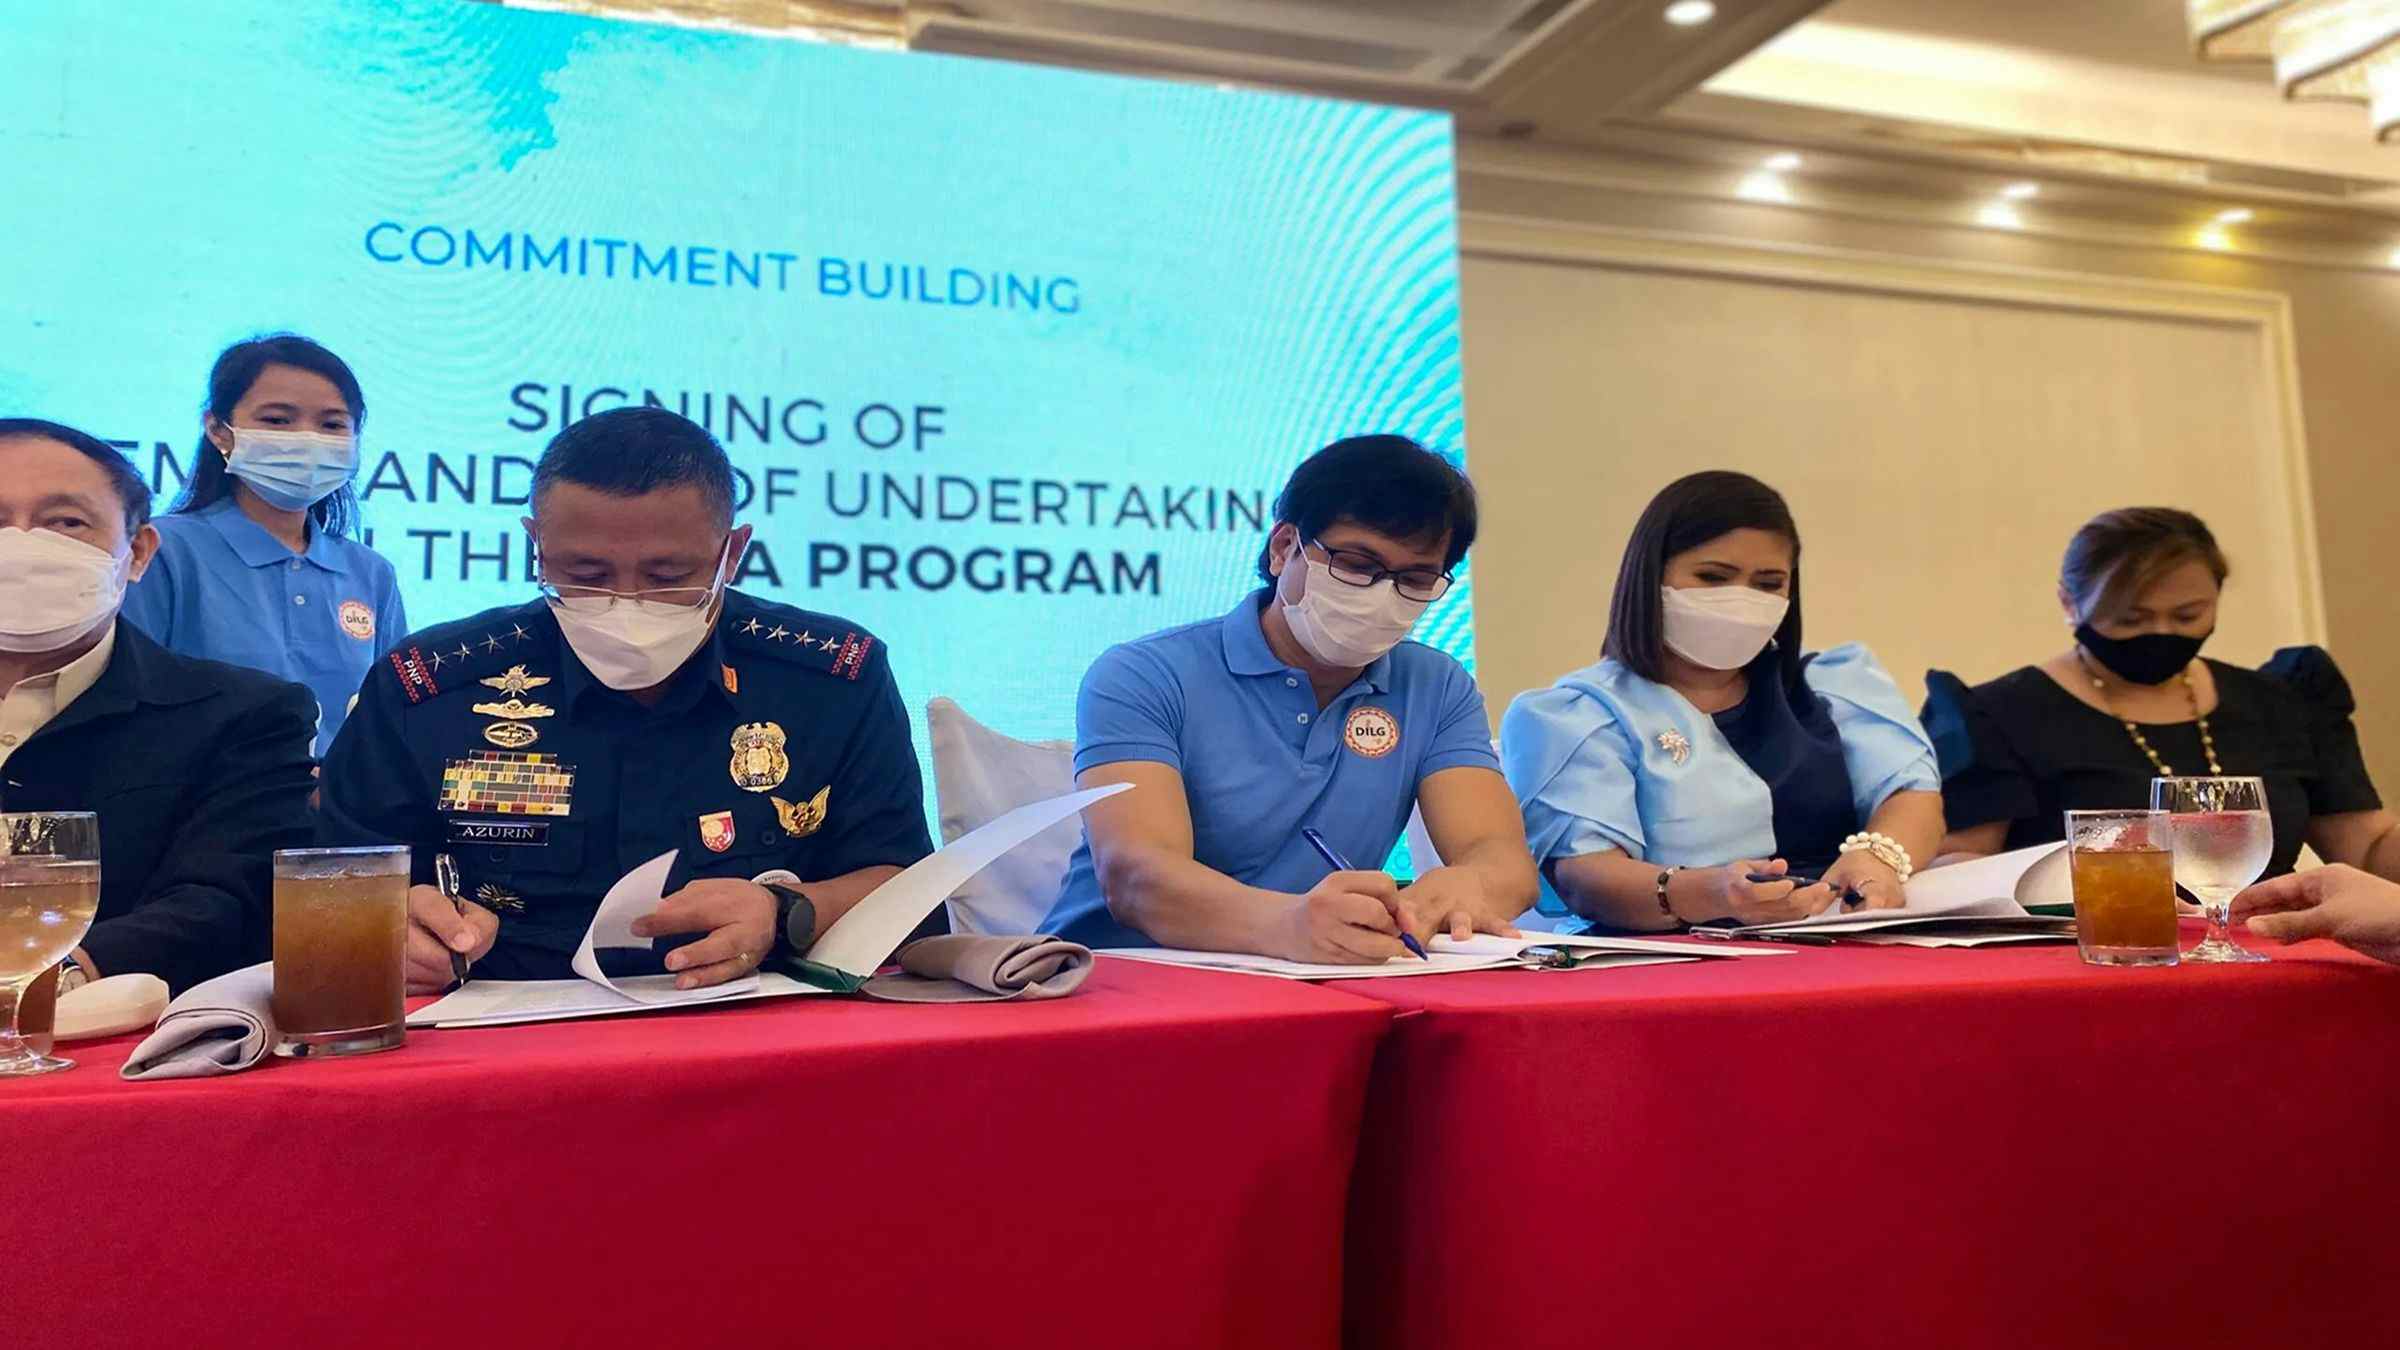 Phl. government launches new anti drug campaign